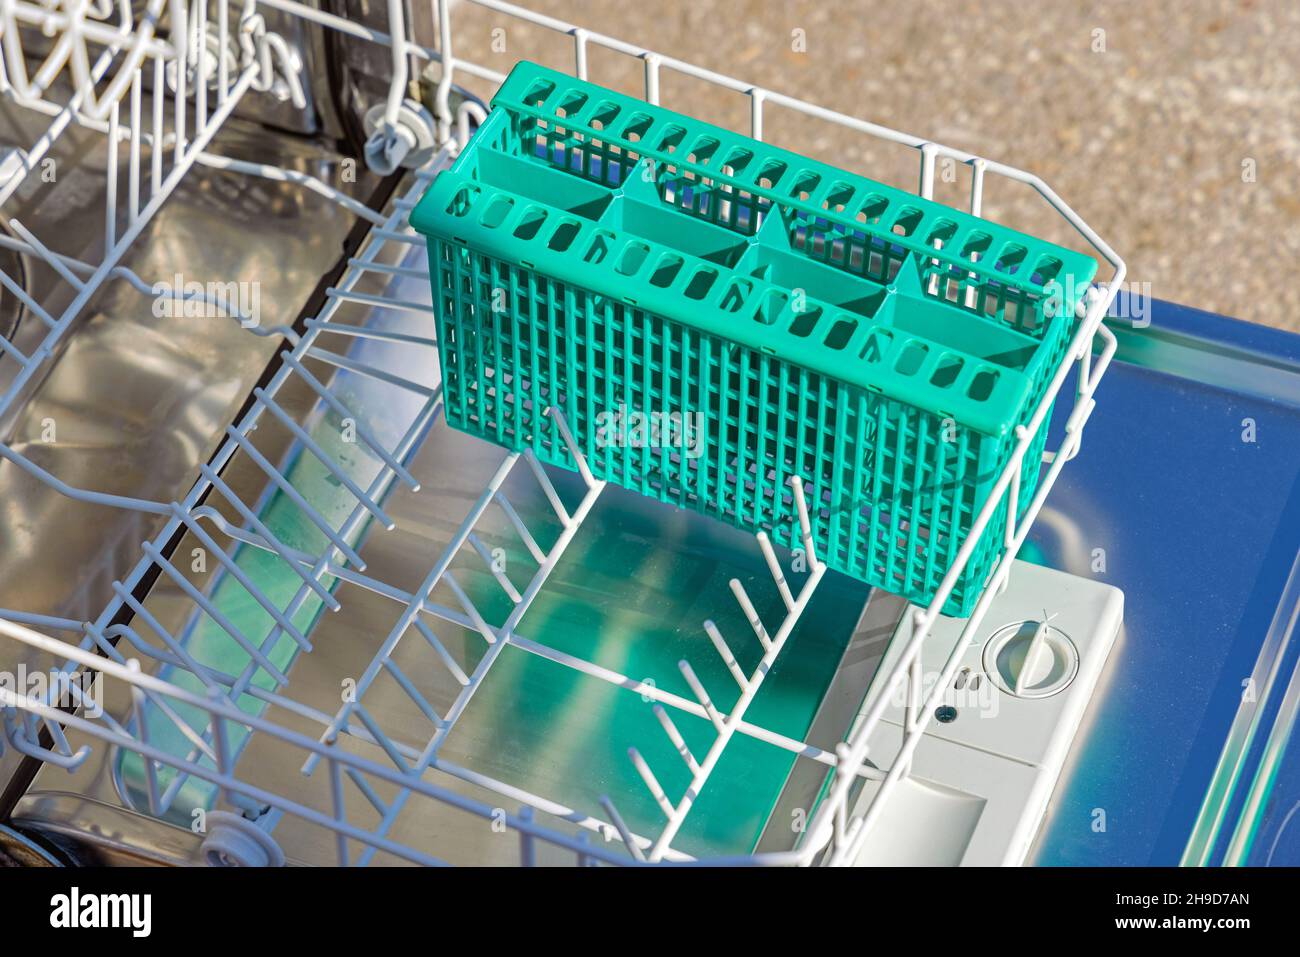 Lower Rack With Utensil Cutlery Holder at Small Dishwasher Stock Photo